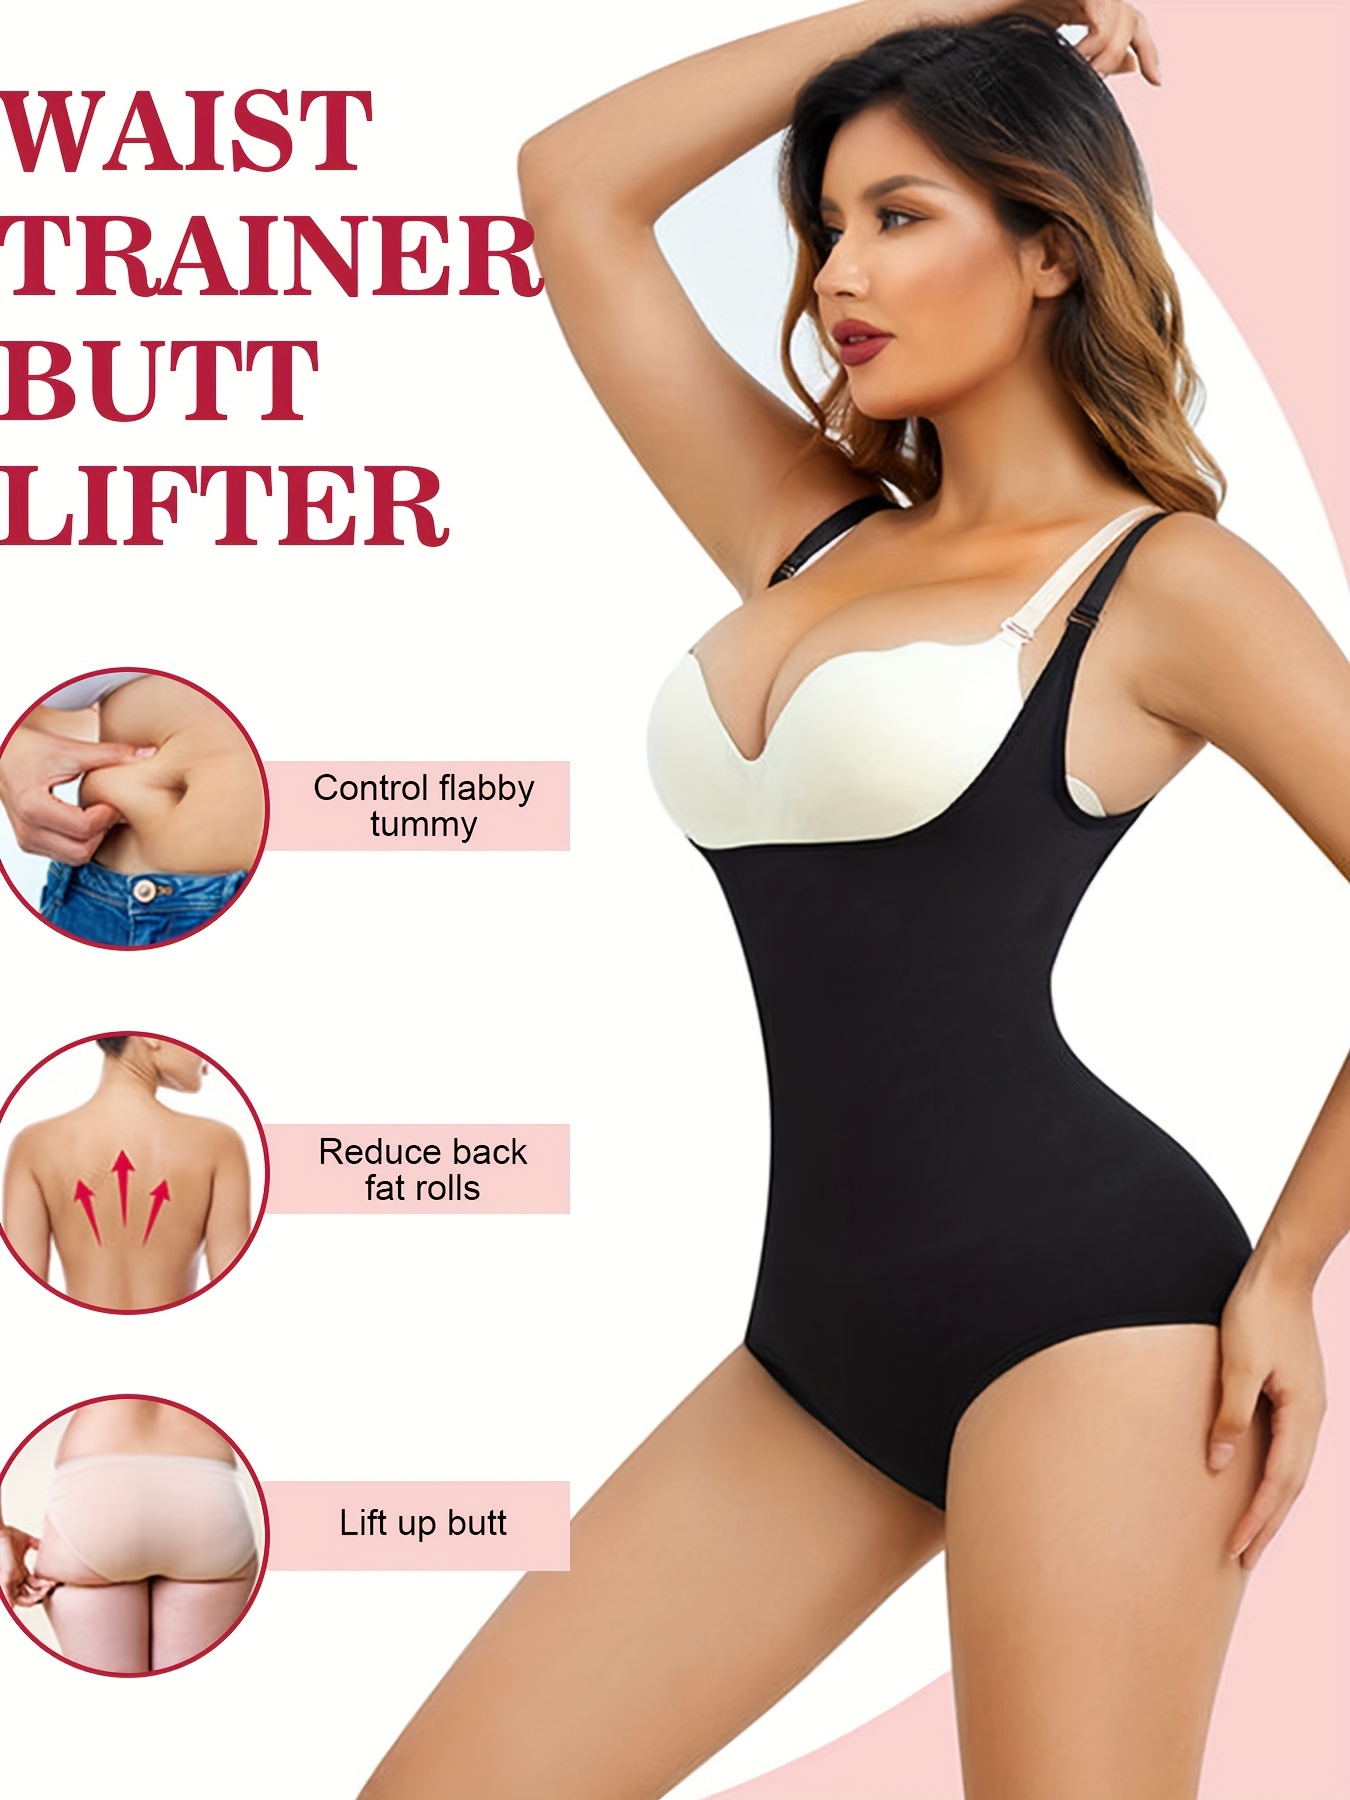 Shapewear: Bodysuits, Body Shapers, Waist Cinchers and Shaping